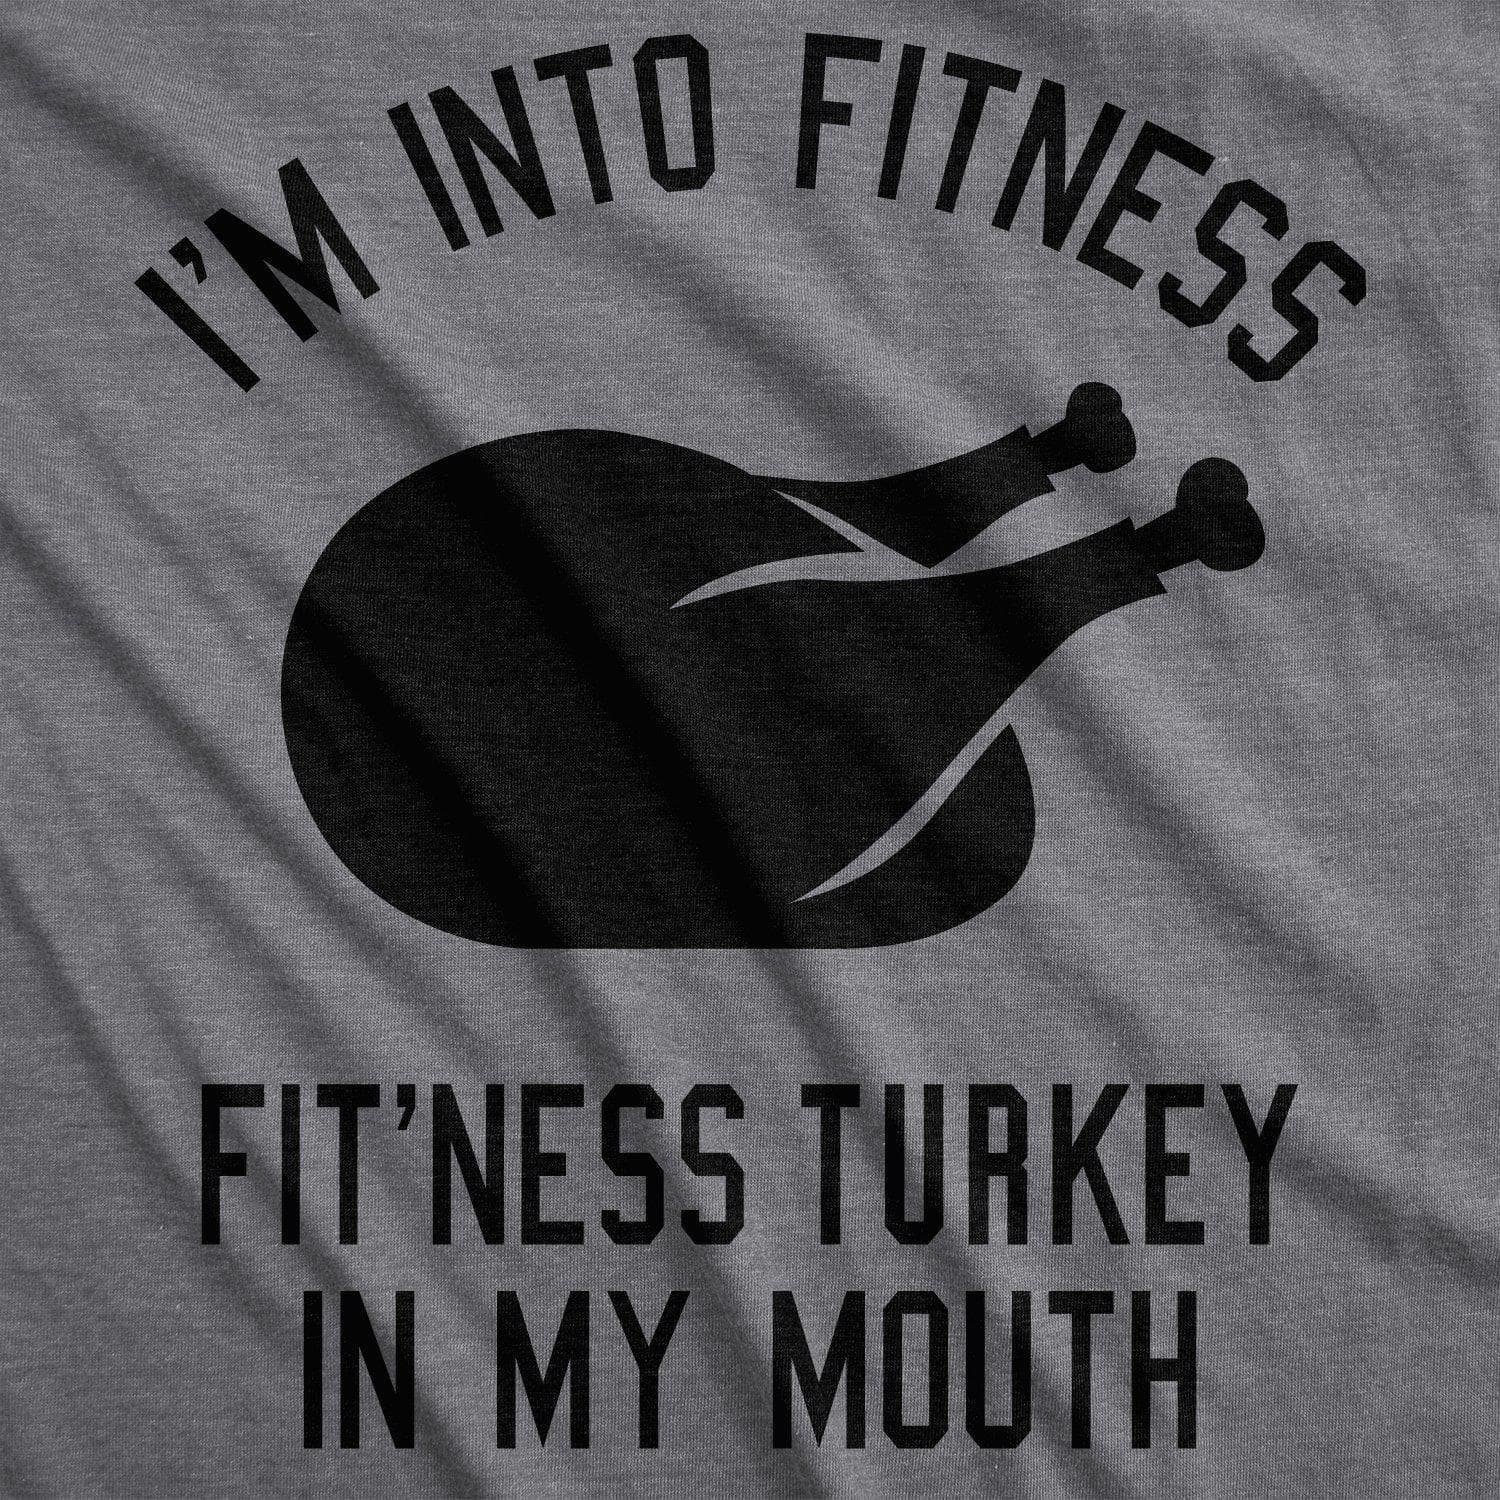 Fitness Turkey In My Mouth Men's Tshirt - Crazy Dog T-Shirts